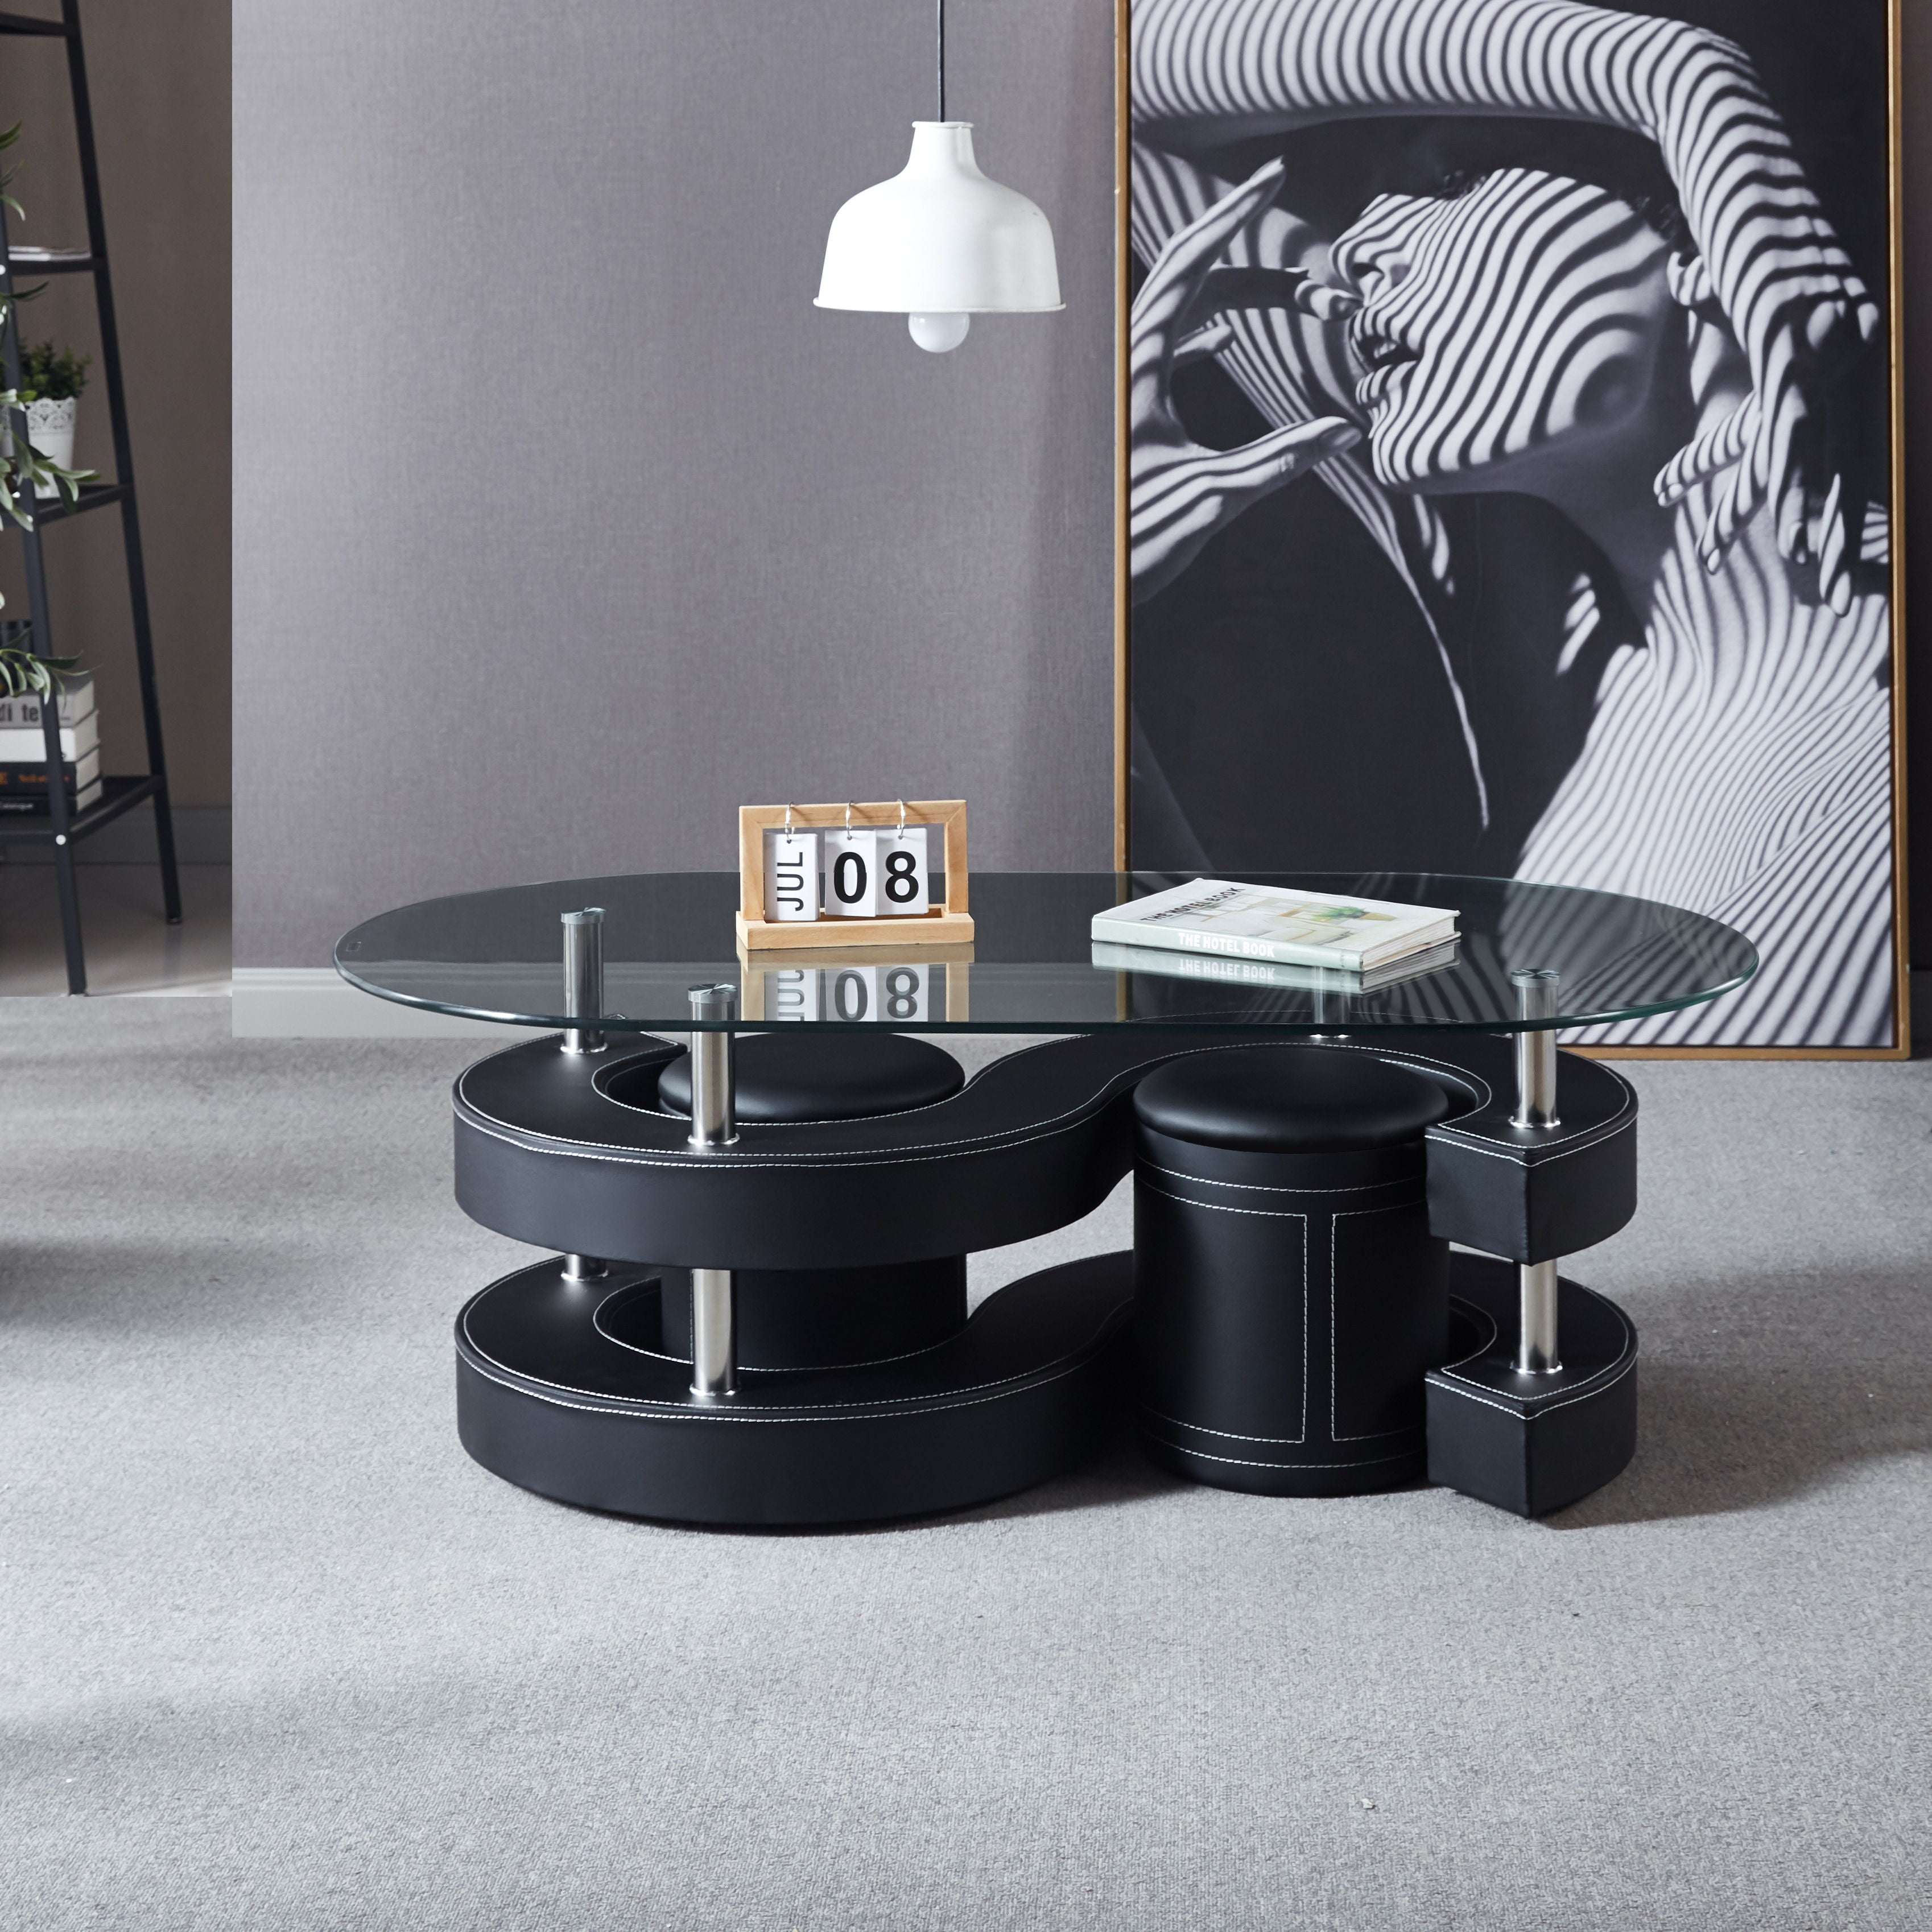 3 Pieces Coffee Table Set, Oval 10Mm / 0.39" Thick Tempered Glass Table And 2 Leather Stools - Black